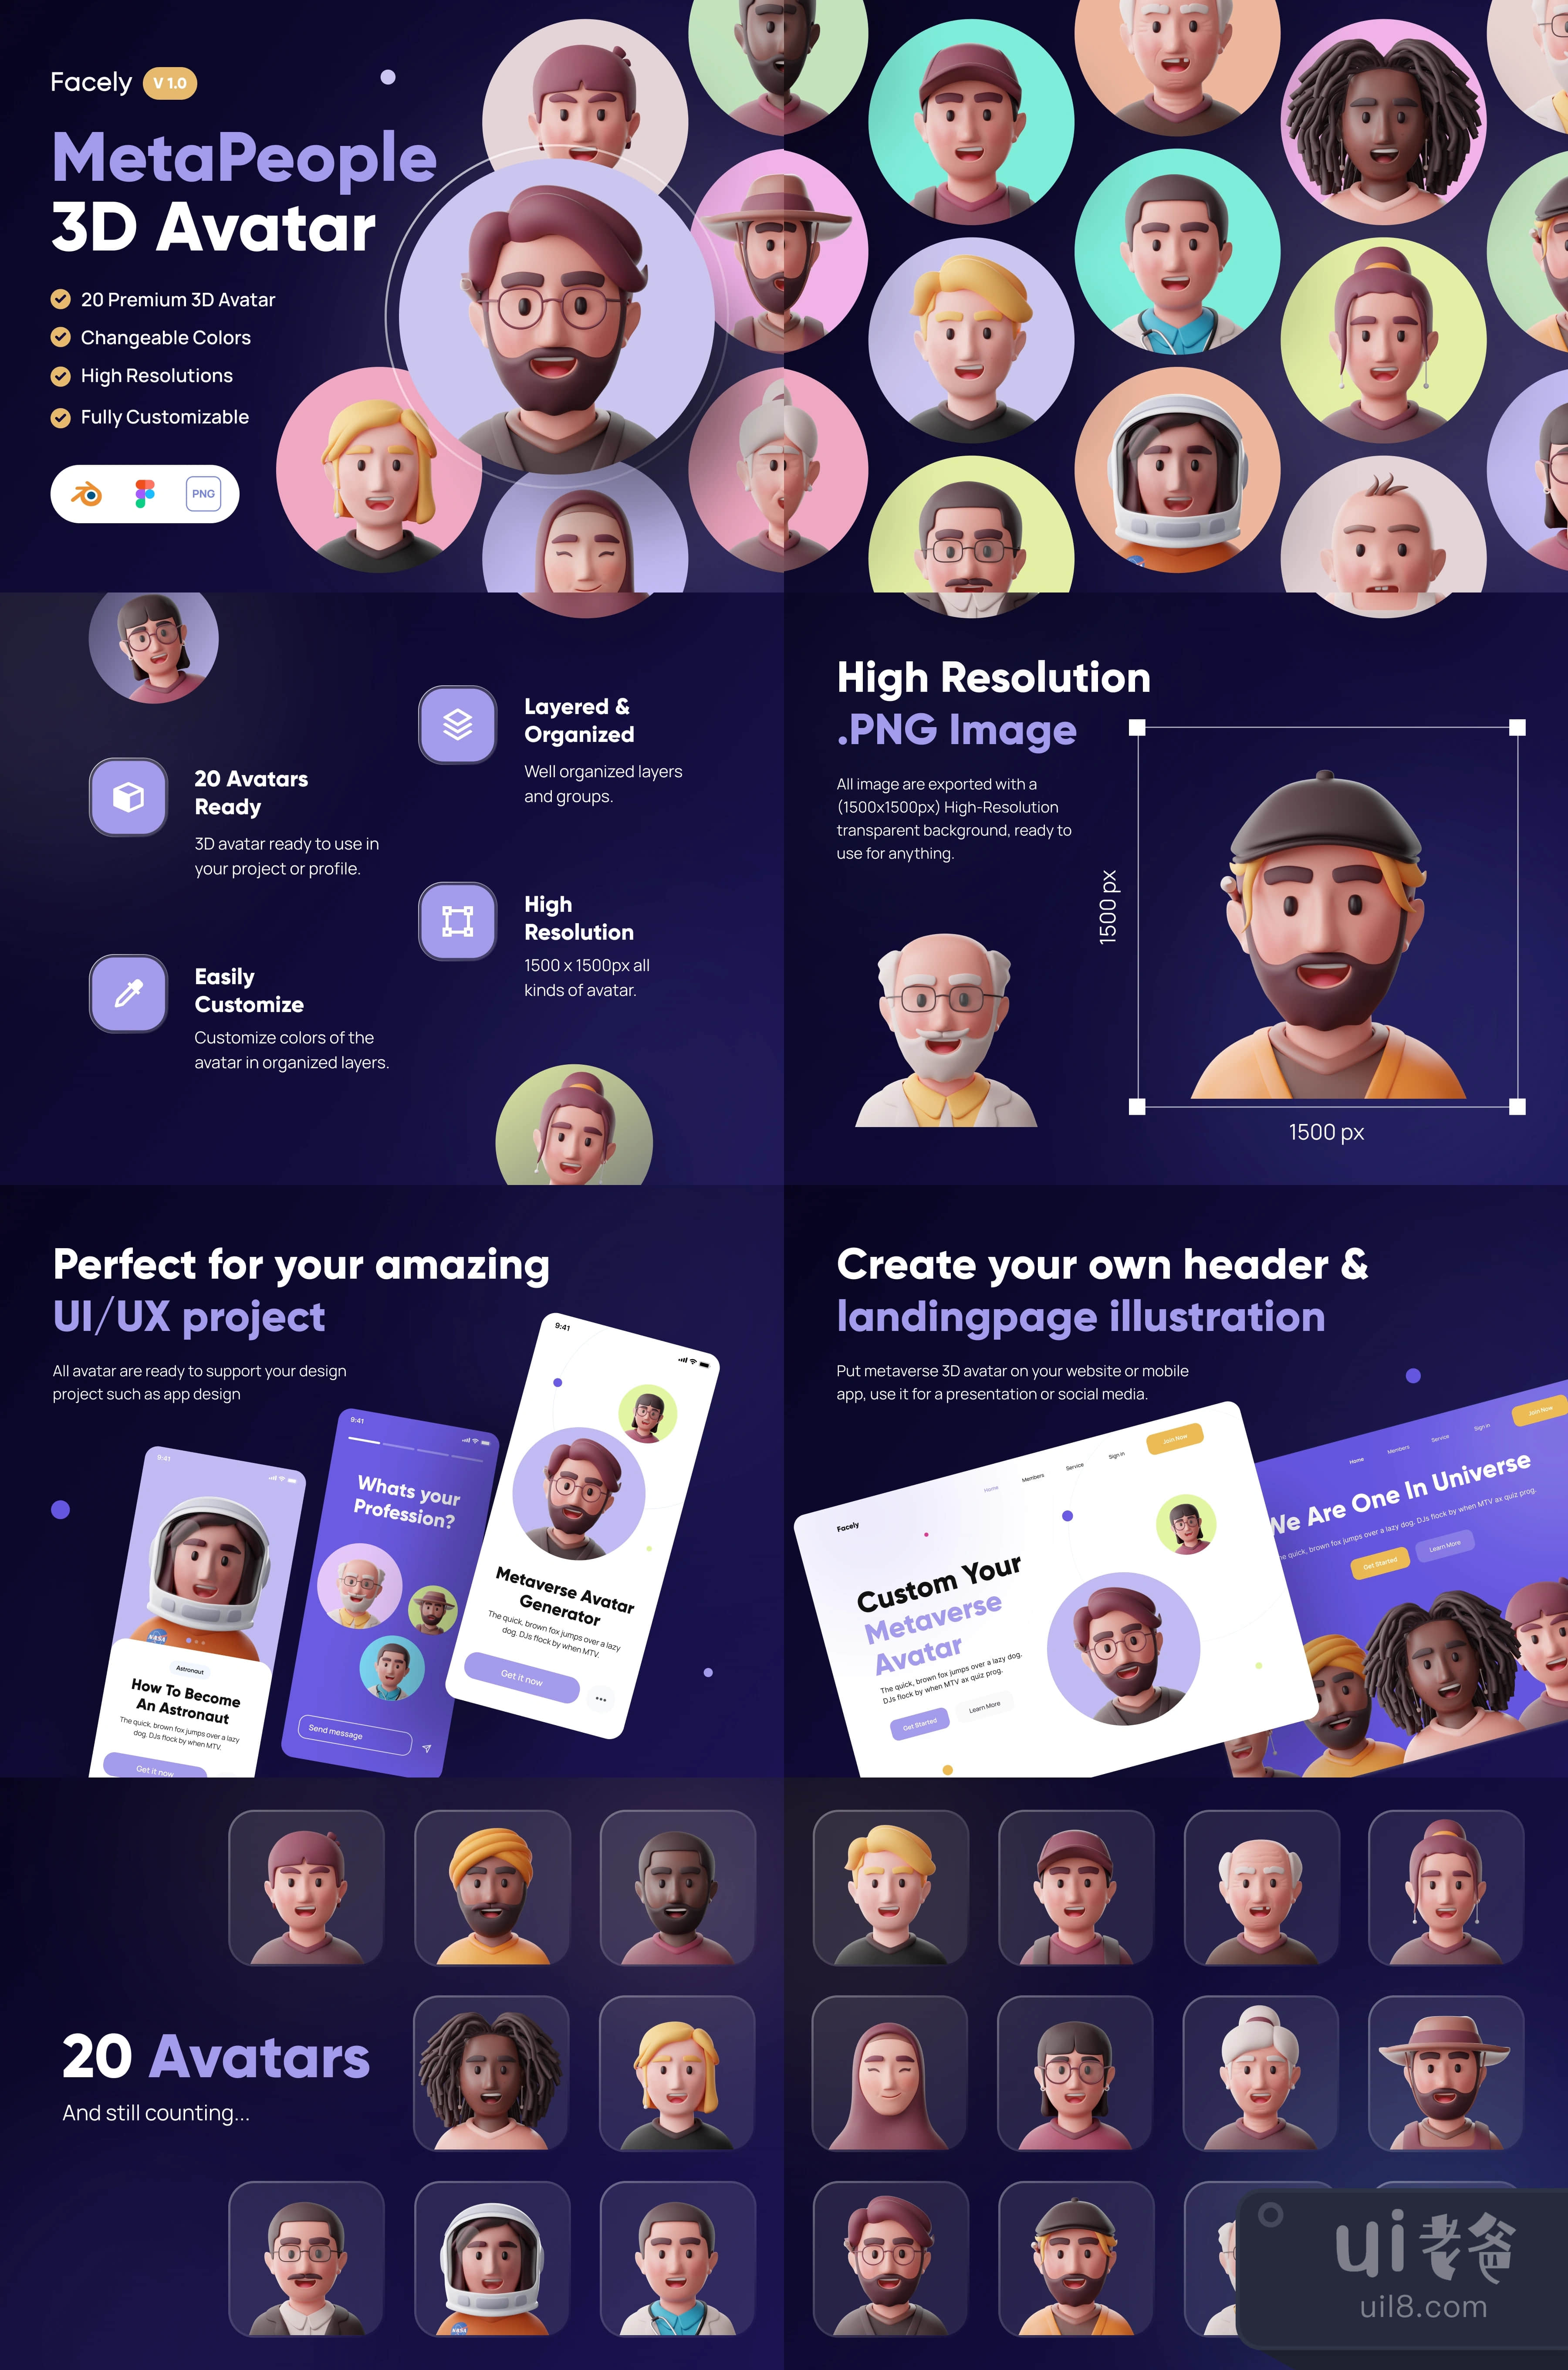 Facely – MetaPeople 3D头像 (Facely – MetaPeople 3D Avatar)插图1